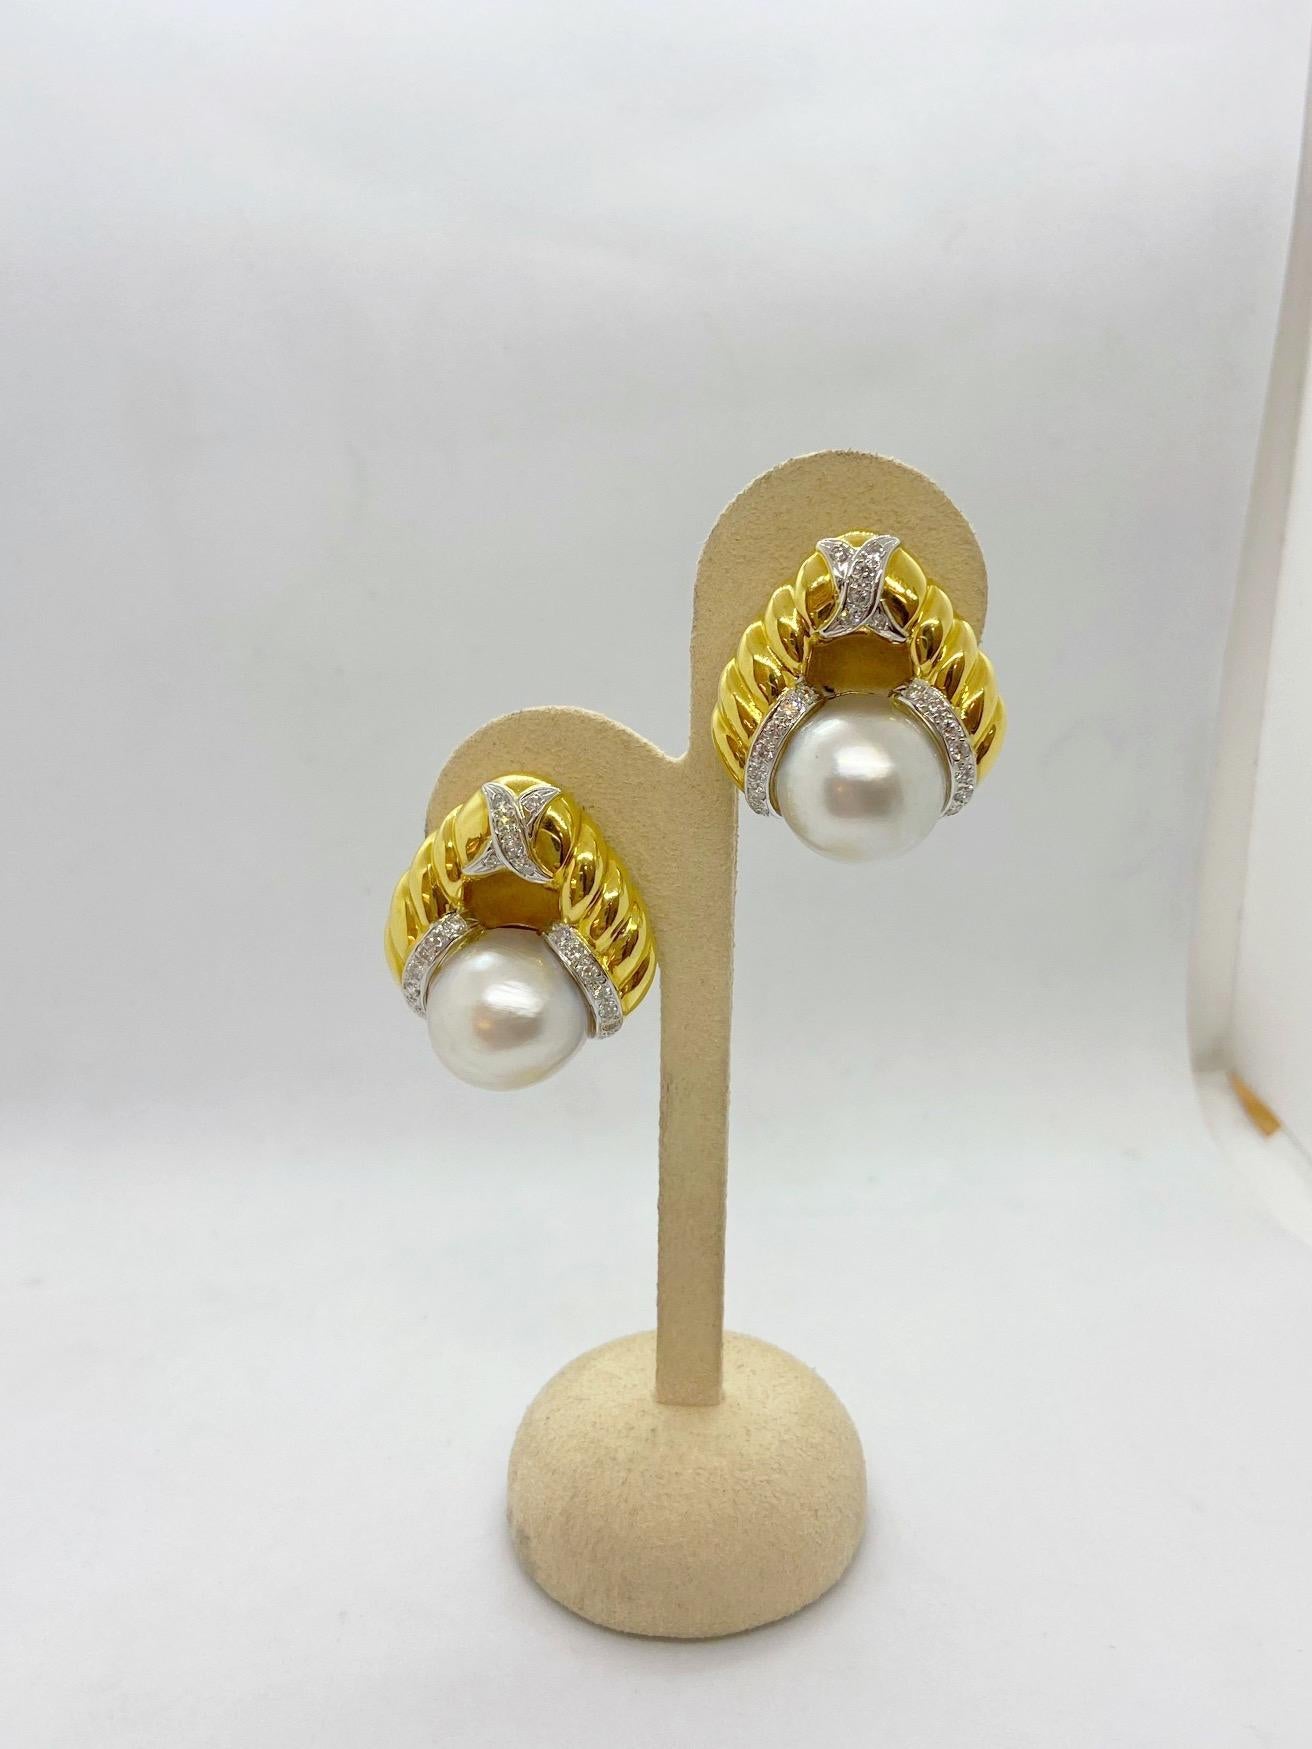 Contemporary Cellini 18 Karat Gold Earrings with South Sea Pearls and 1.10 Carat Diamonds